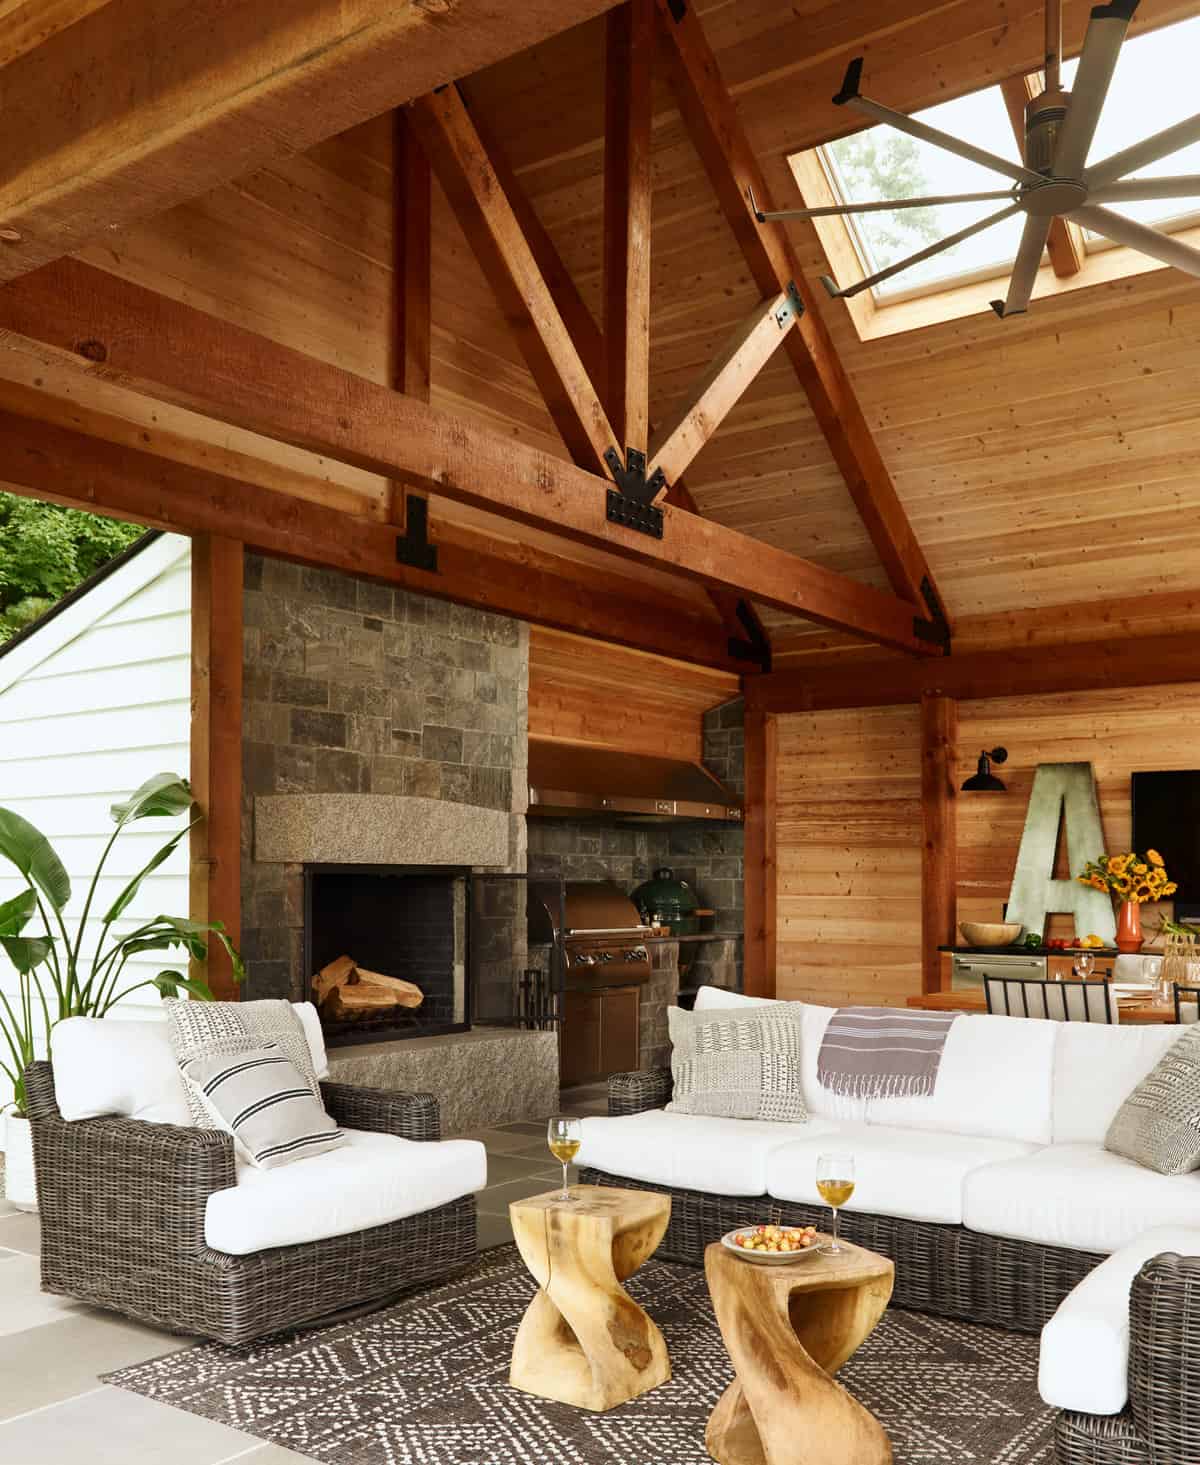 26-New-Additon-Outdoor-Room-Seating-Area.The room is framed with an exposed Douglas Fir timber frame, which is both structural and decorative, and matches the frame in the adjacent family room. The result is a rustic yet modern, beautiful outdoor space that provides an exquisite transition between the indoors and the outdoors.